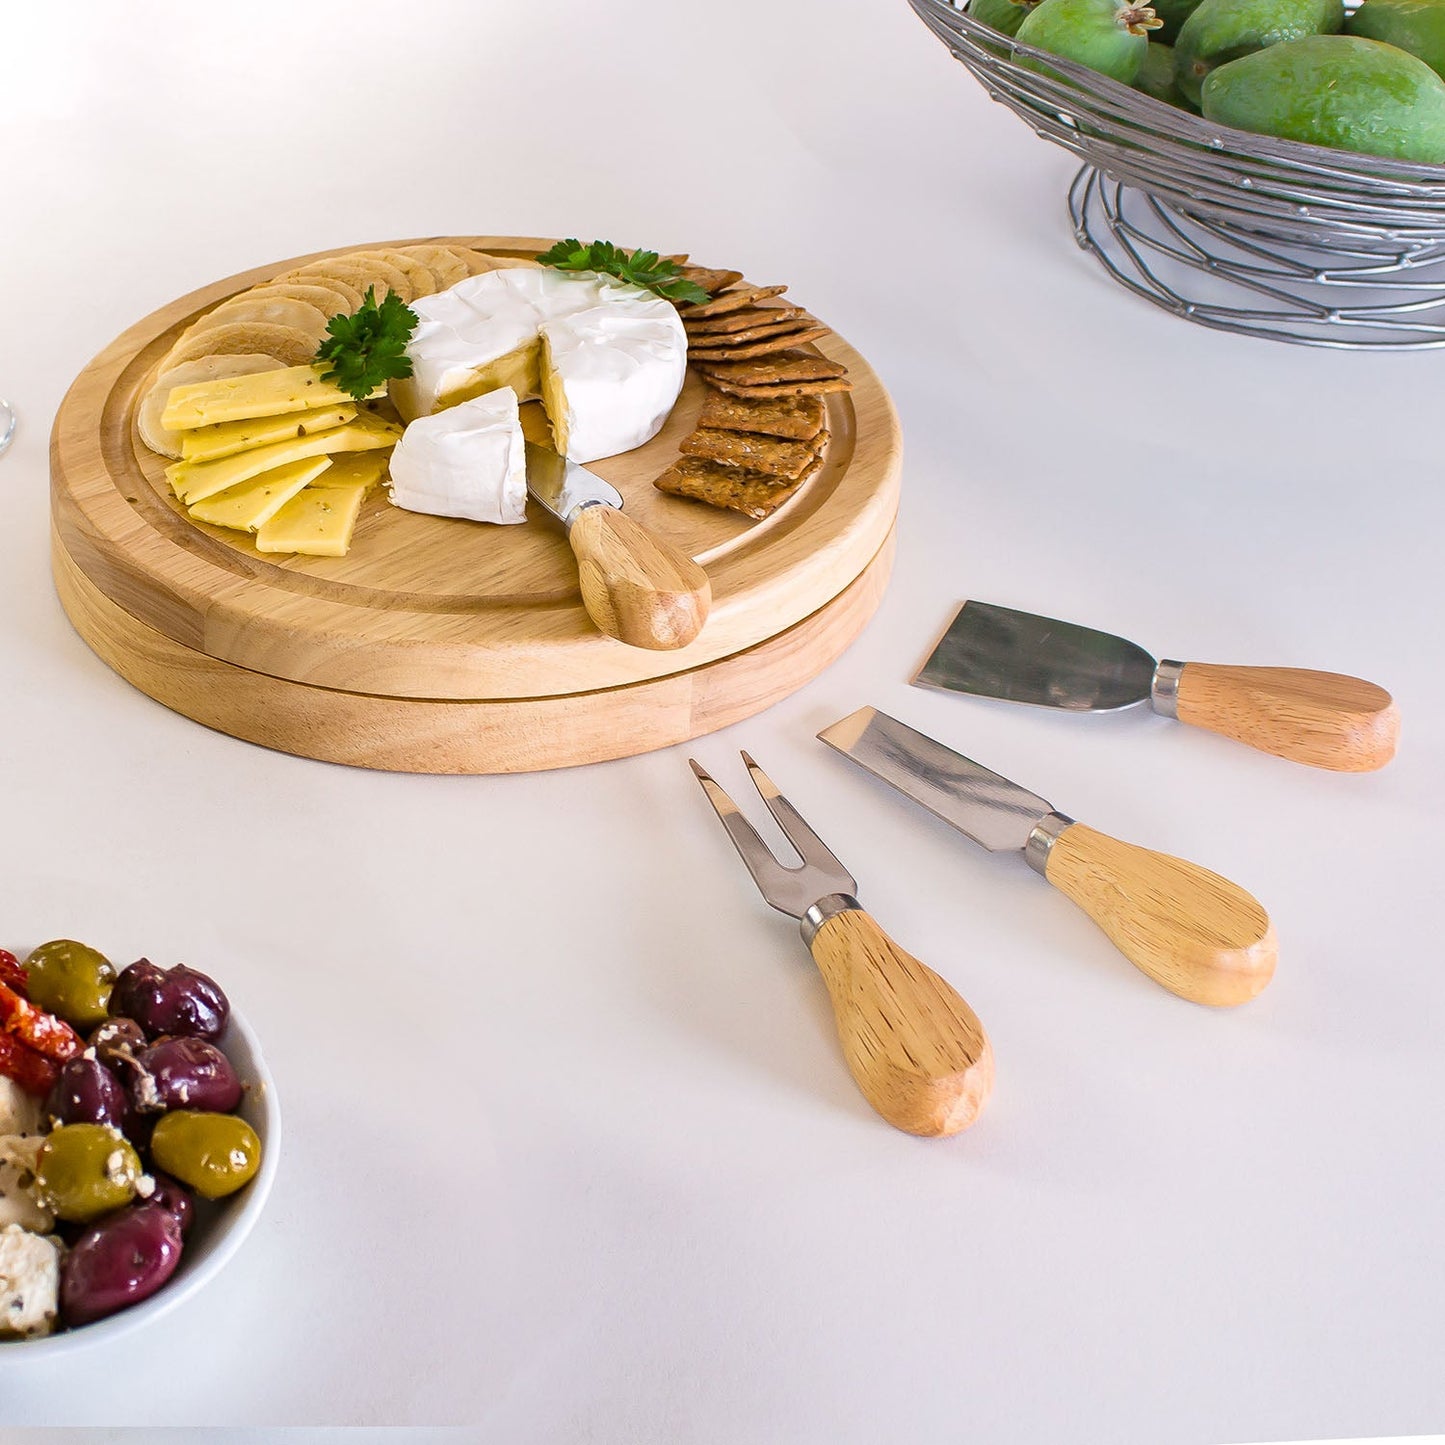 Personalised wooden Cheese Board - Swivel